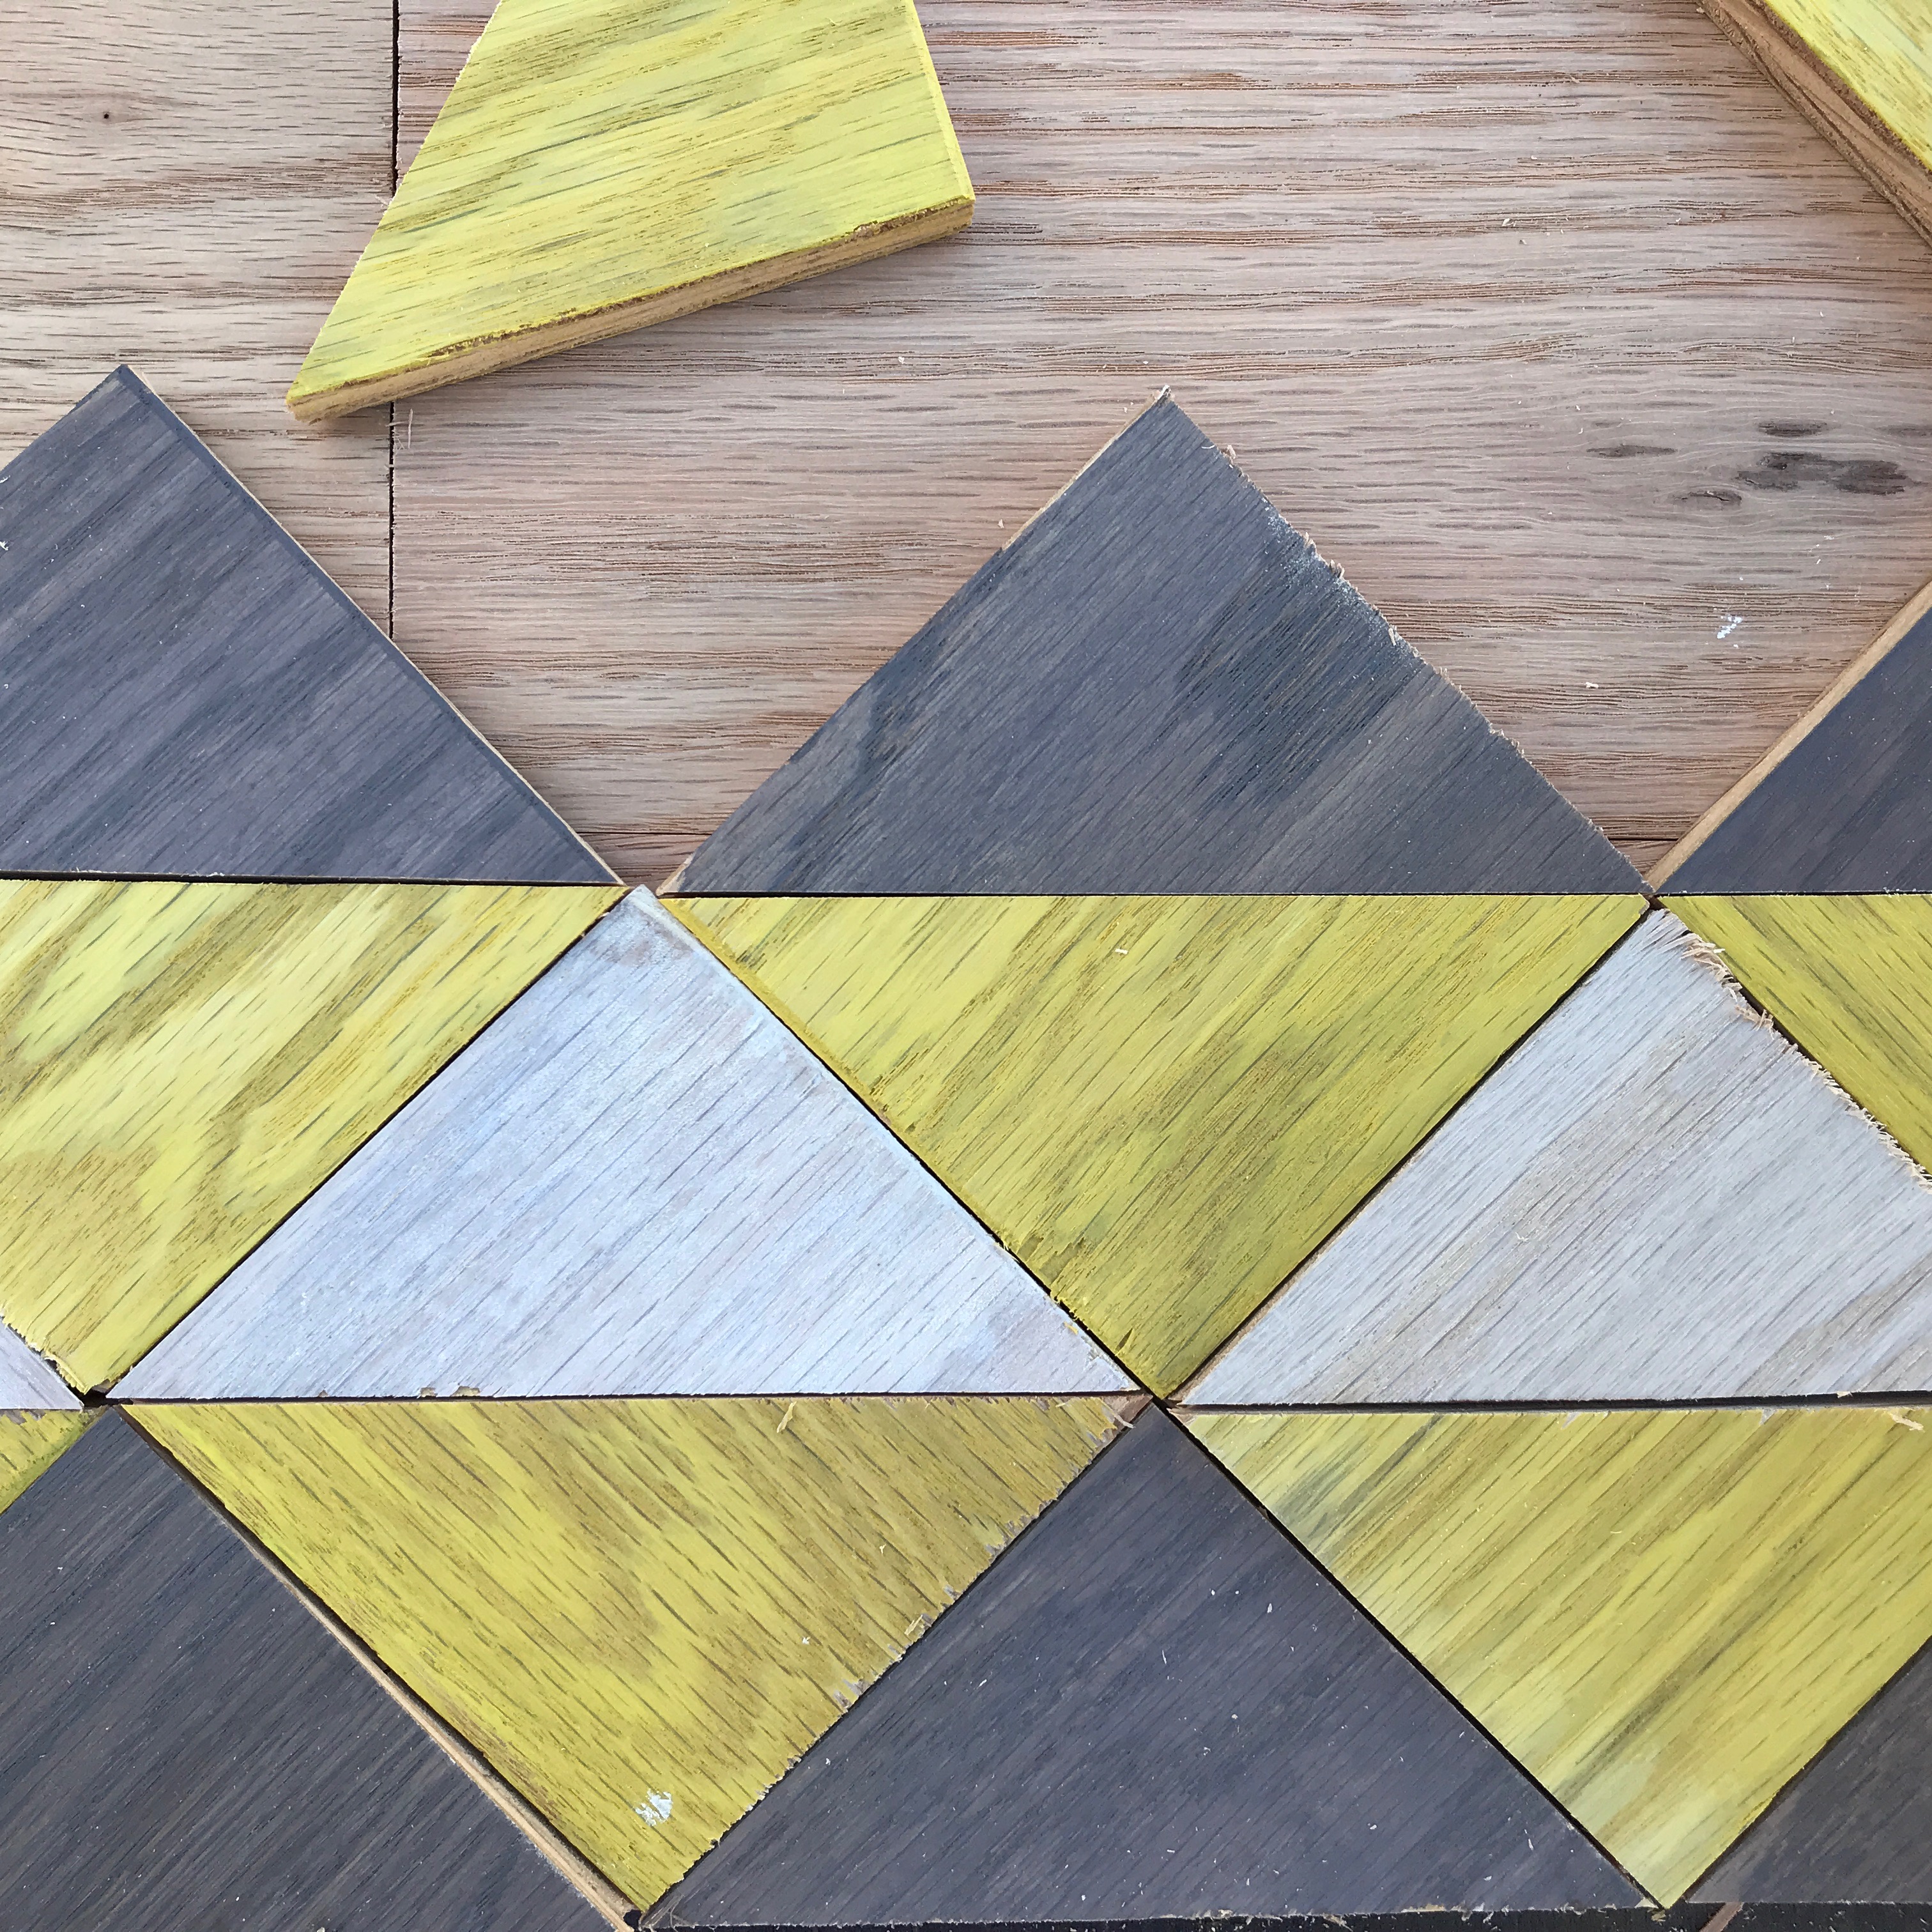 6 MyFixitUpLife_Minwax_wood_tray_laying out triangles